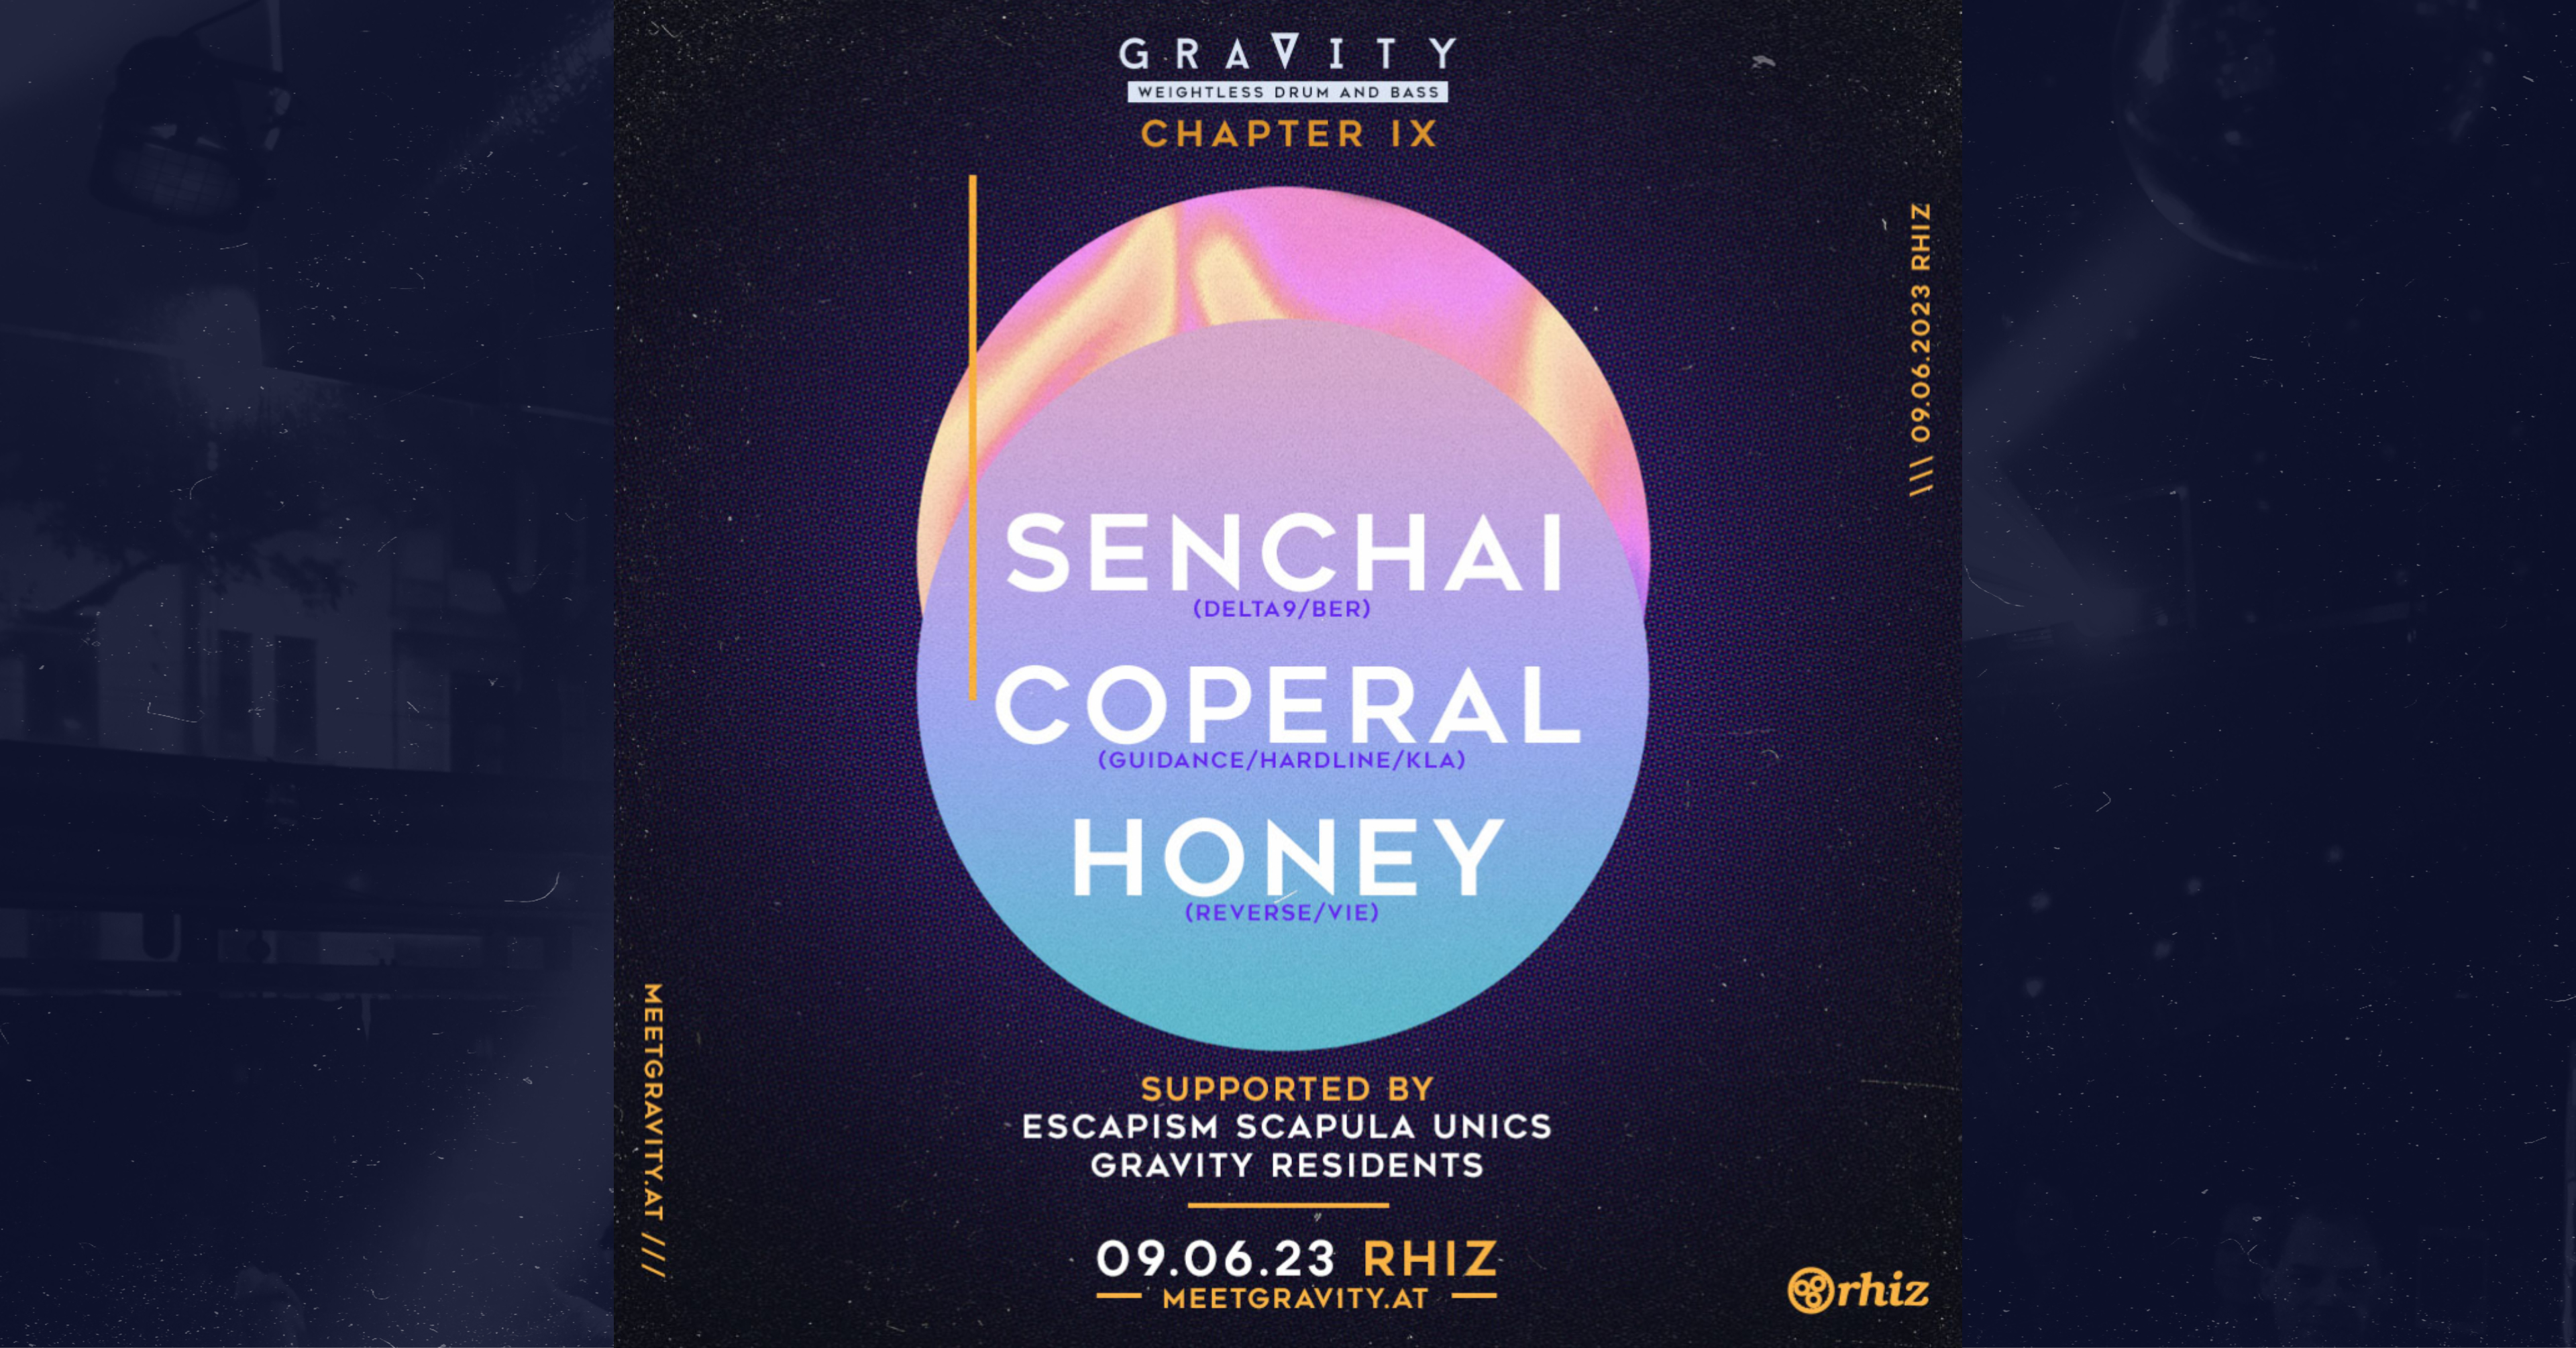 Drum and Bass is back. Gravity in Vienna at Rhiz on Friday, 09.06.2023